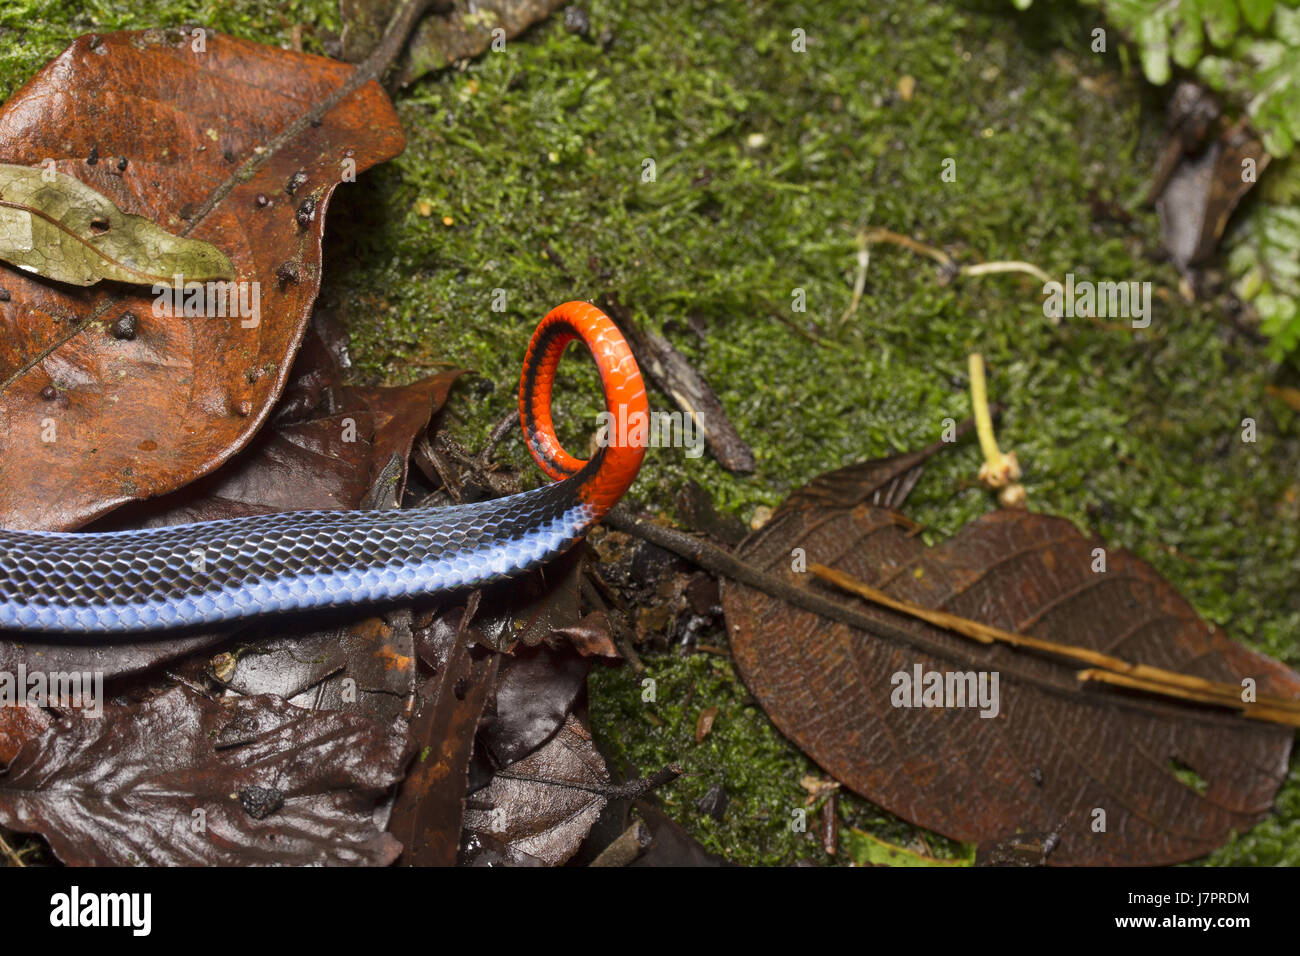 Blue Coral Snake Stock Photo